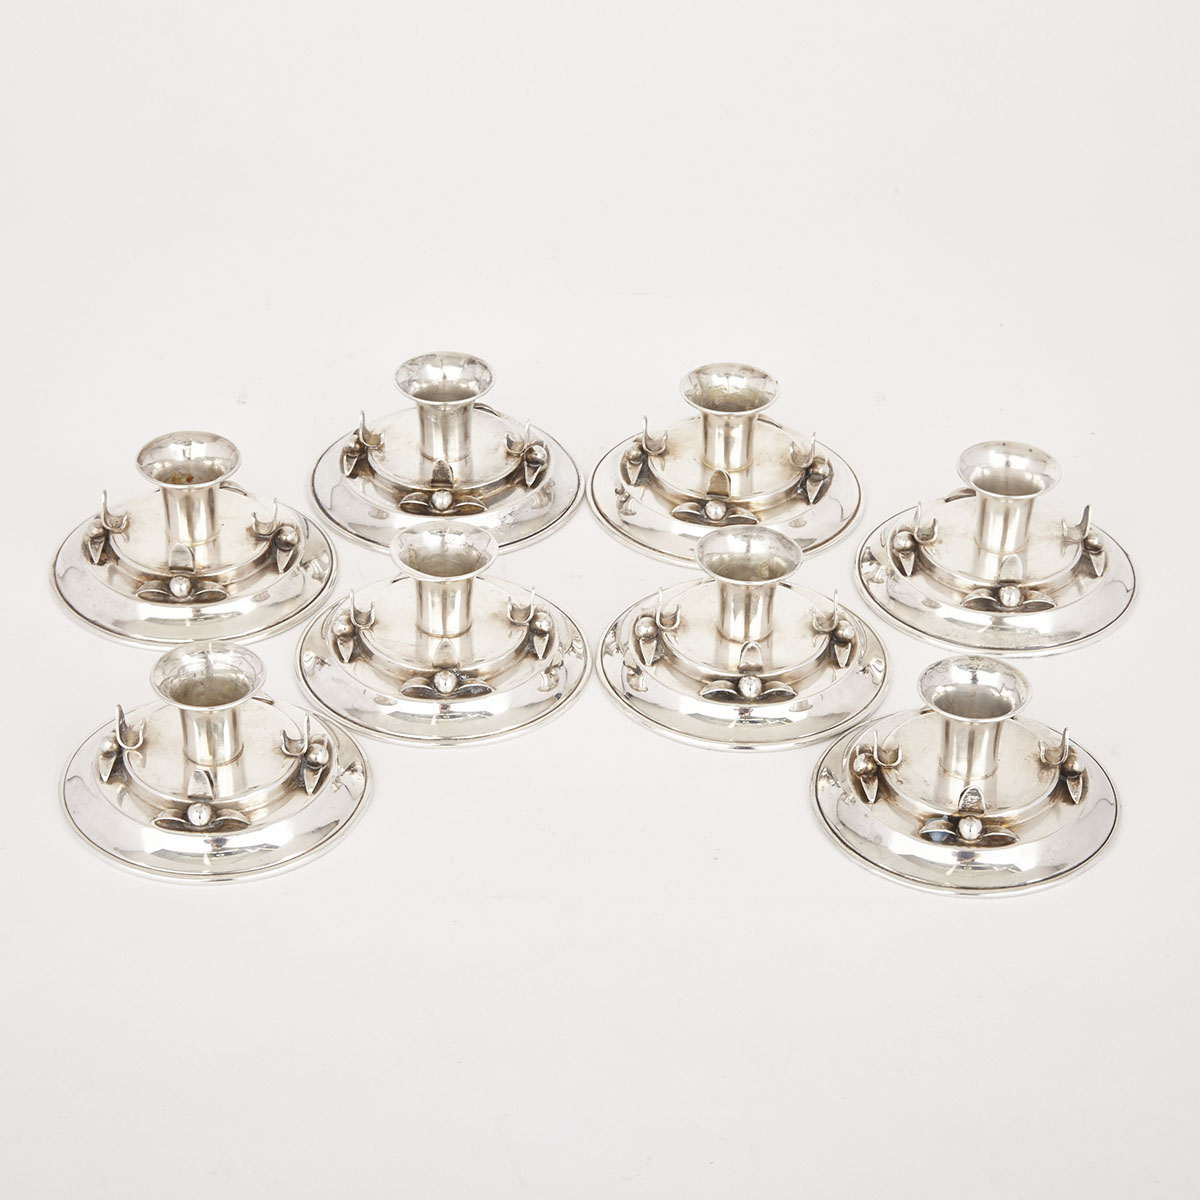 Set of Eight Canadian Silver Low Candlesticks, Carl Poul Petersen, Montreal, Que., mid-20th century